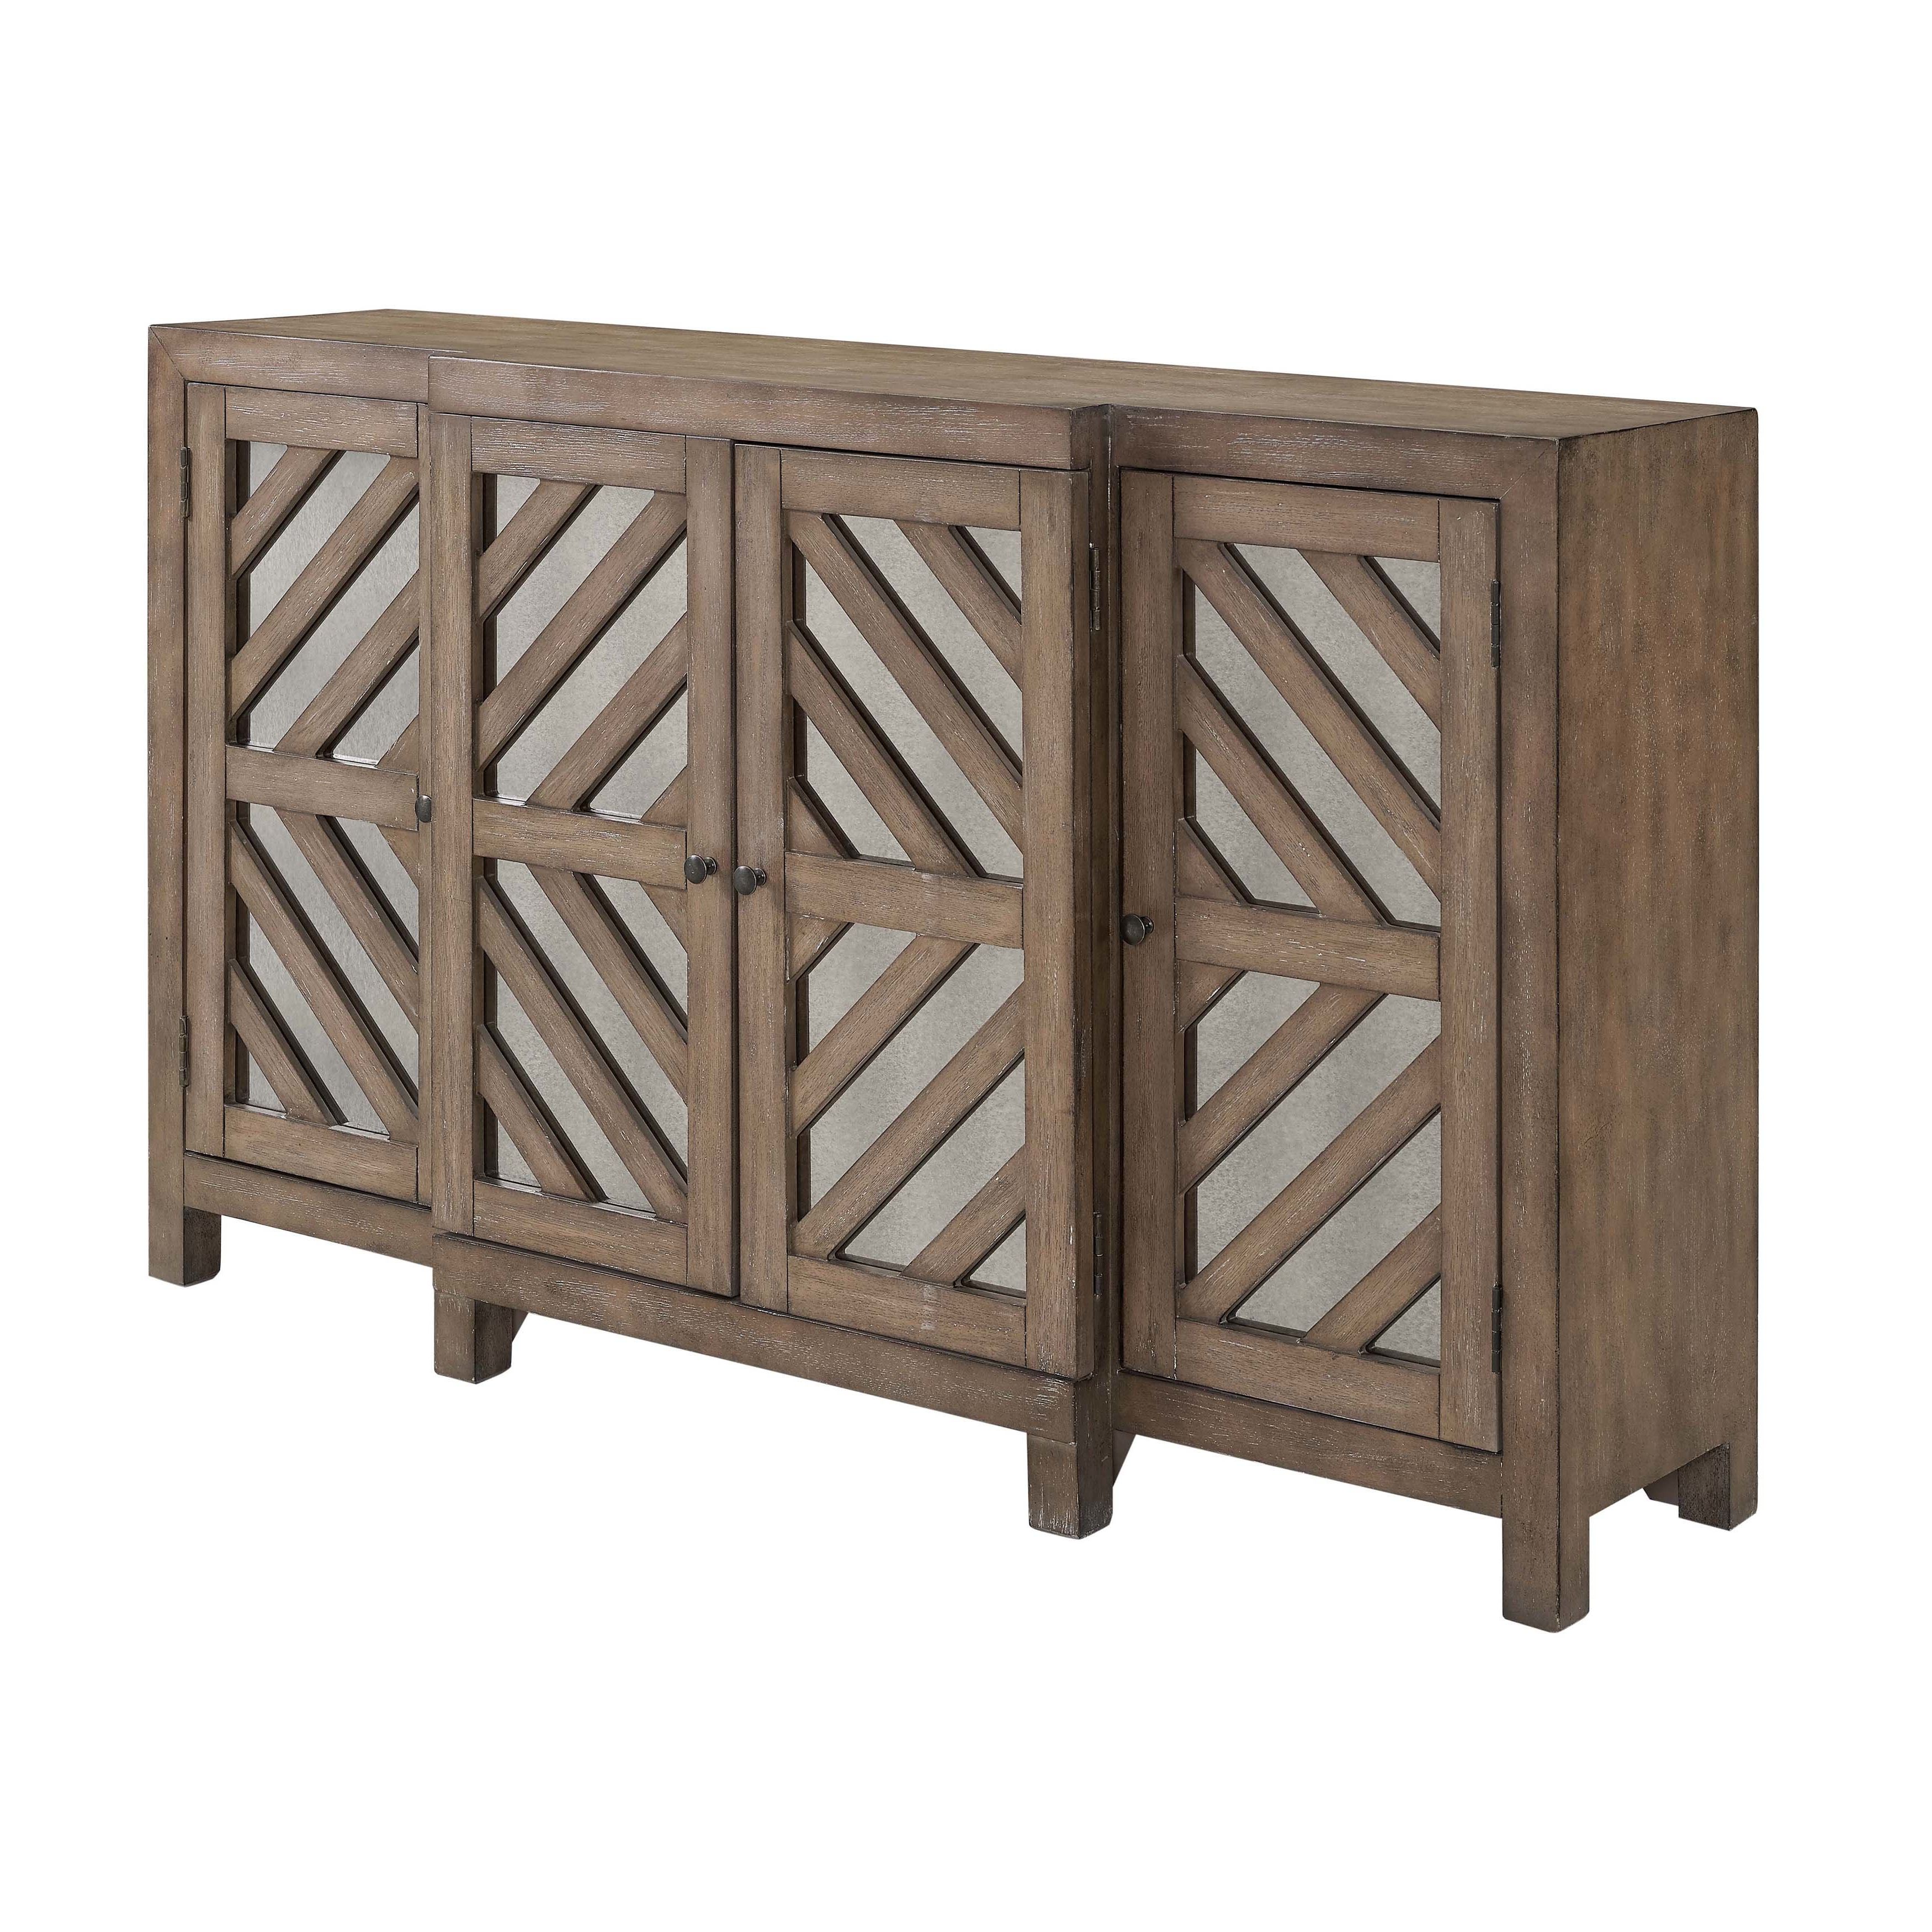 Well Known Melange Brockton Sideboards Inside Union Rustic Lowrey Credenza (View 4 of 20)